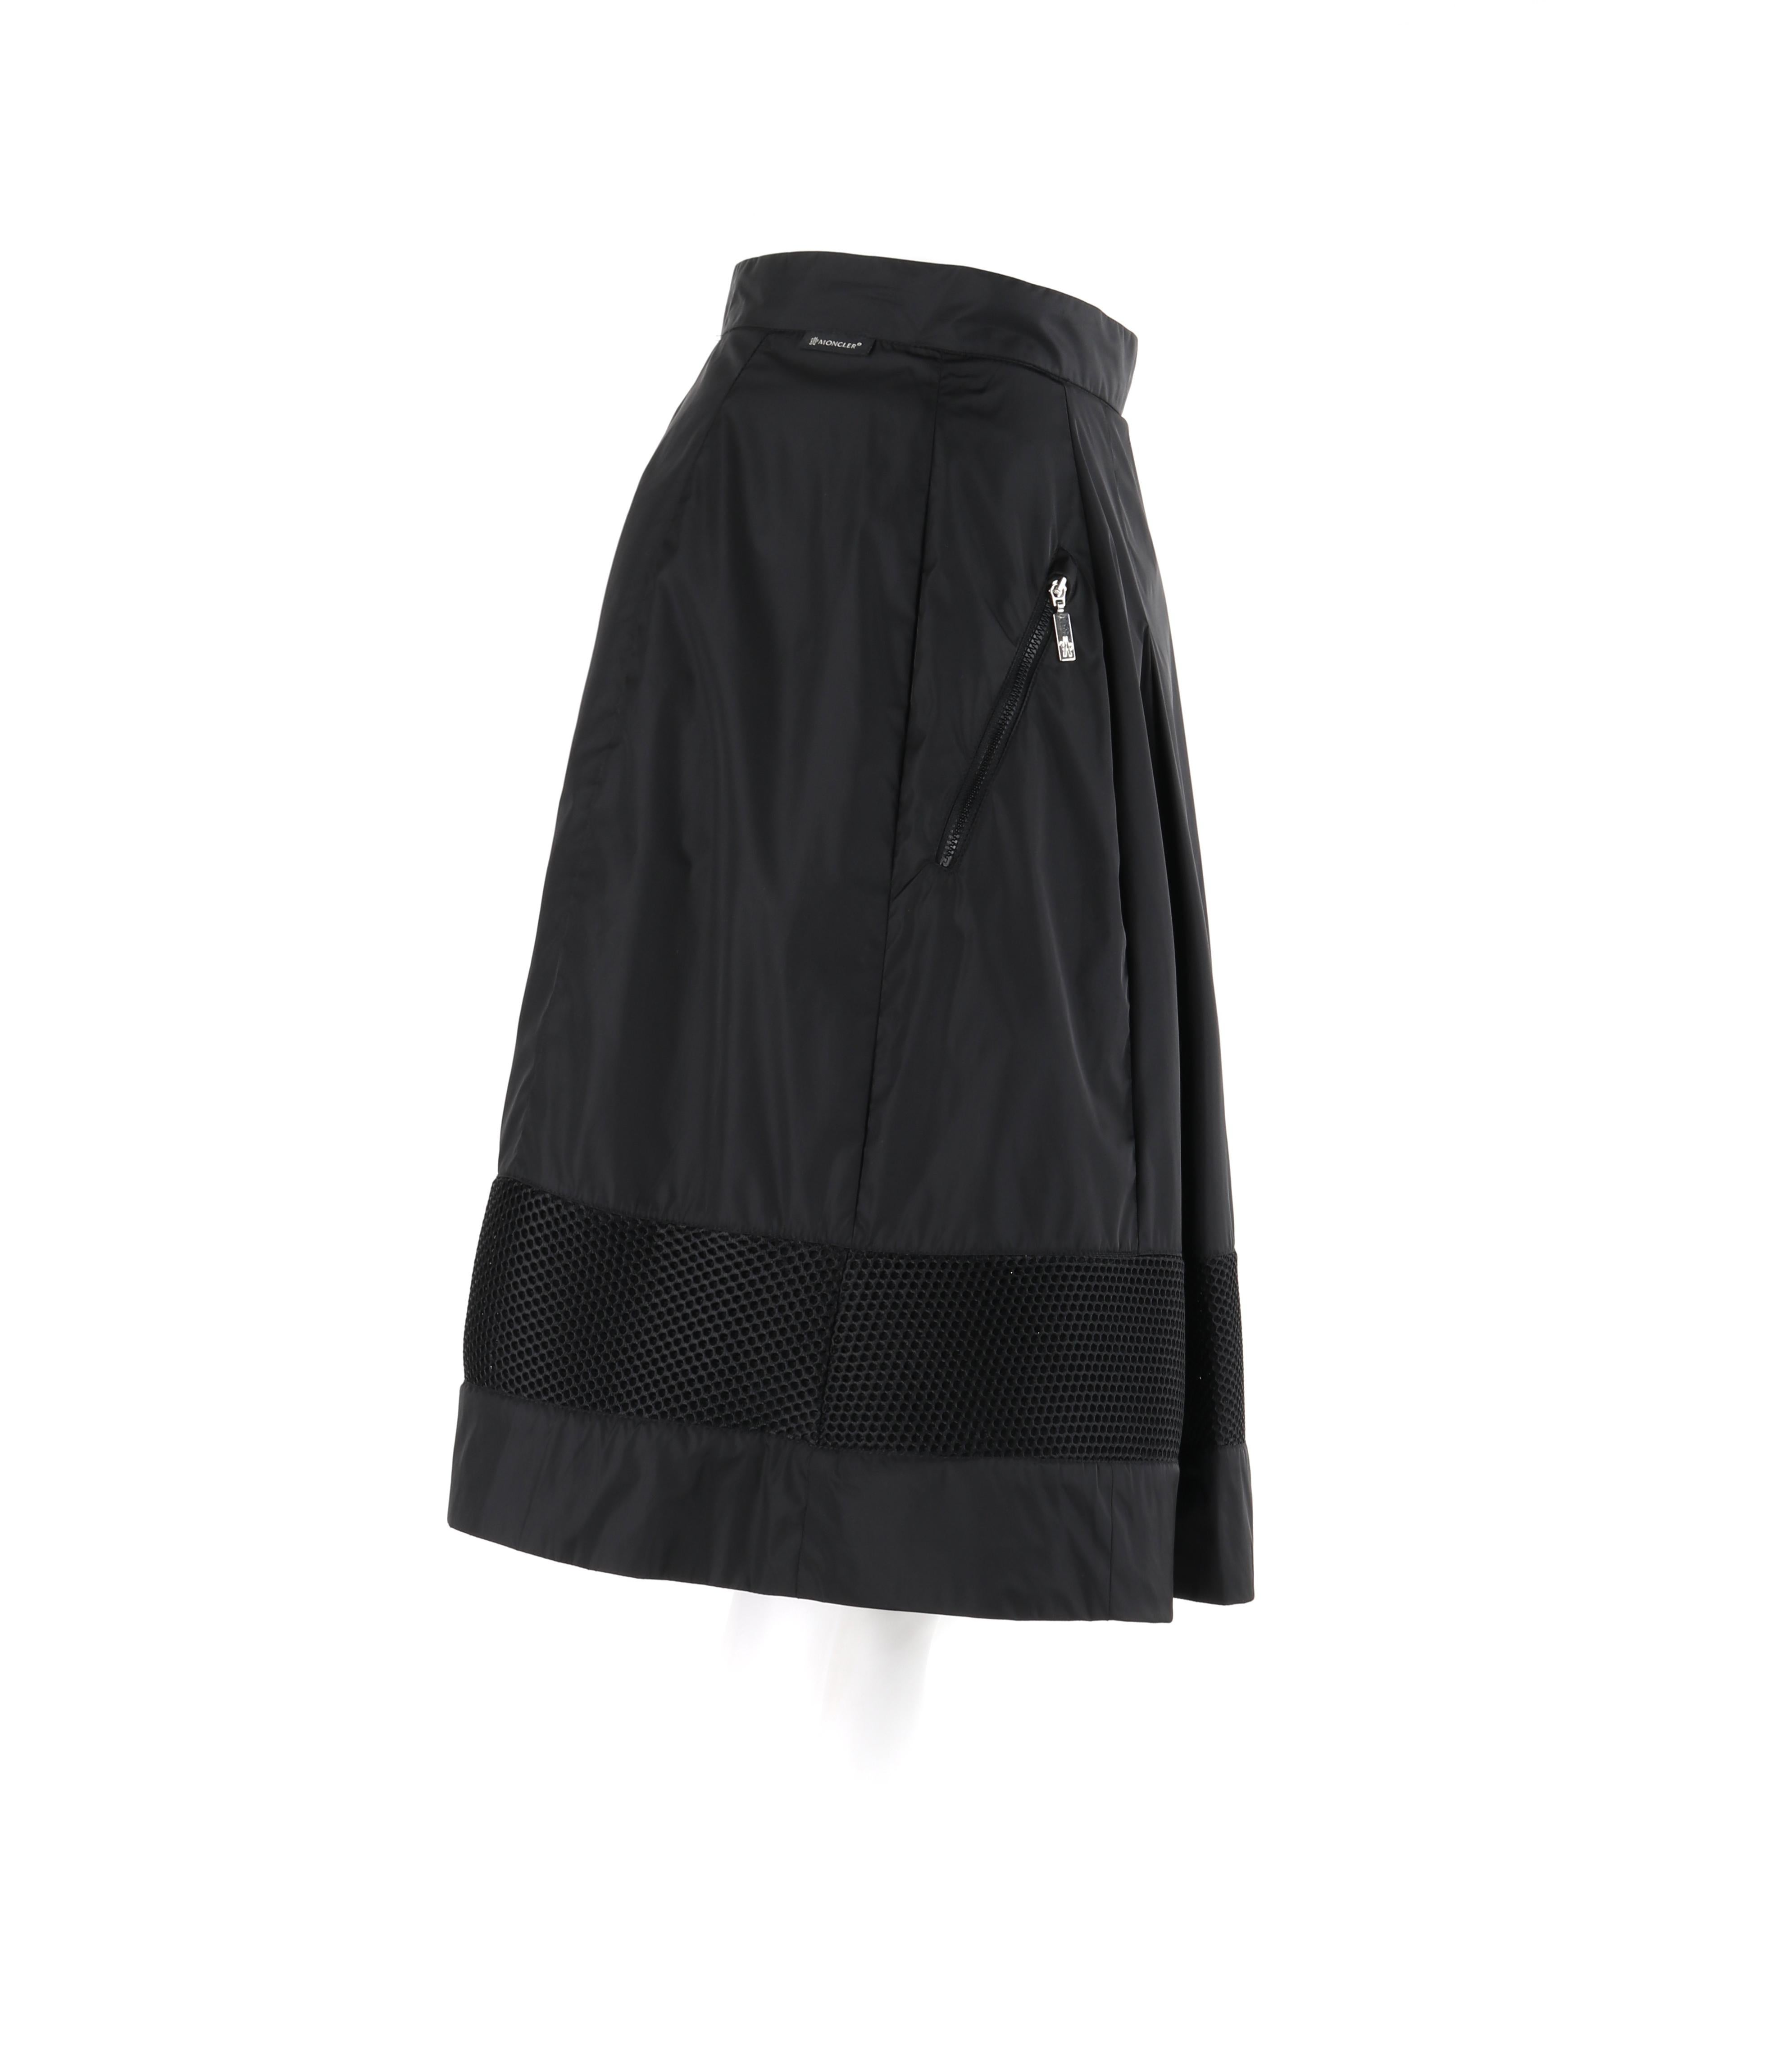 MONCLER c.2009 Nylon Black Mesh Stripe Zip Pocket Pleated Knee Length Skirt In Good Condition For Sale In Thiensville, WI